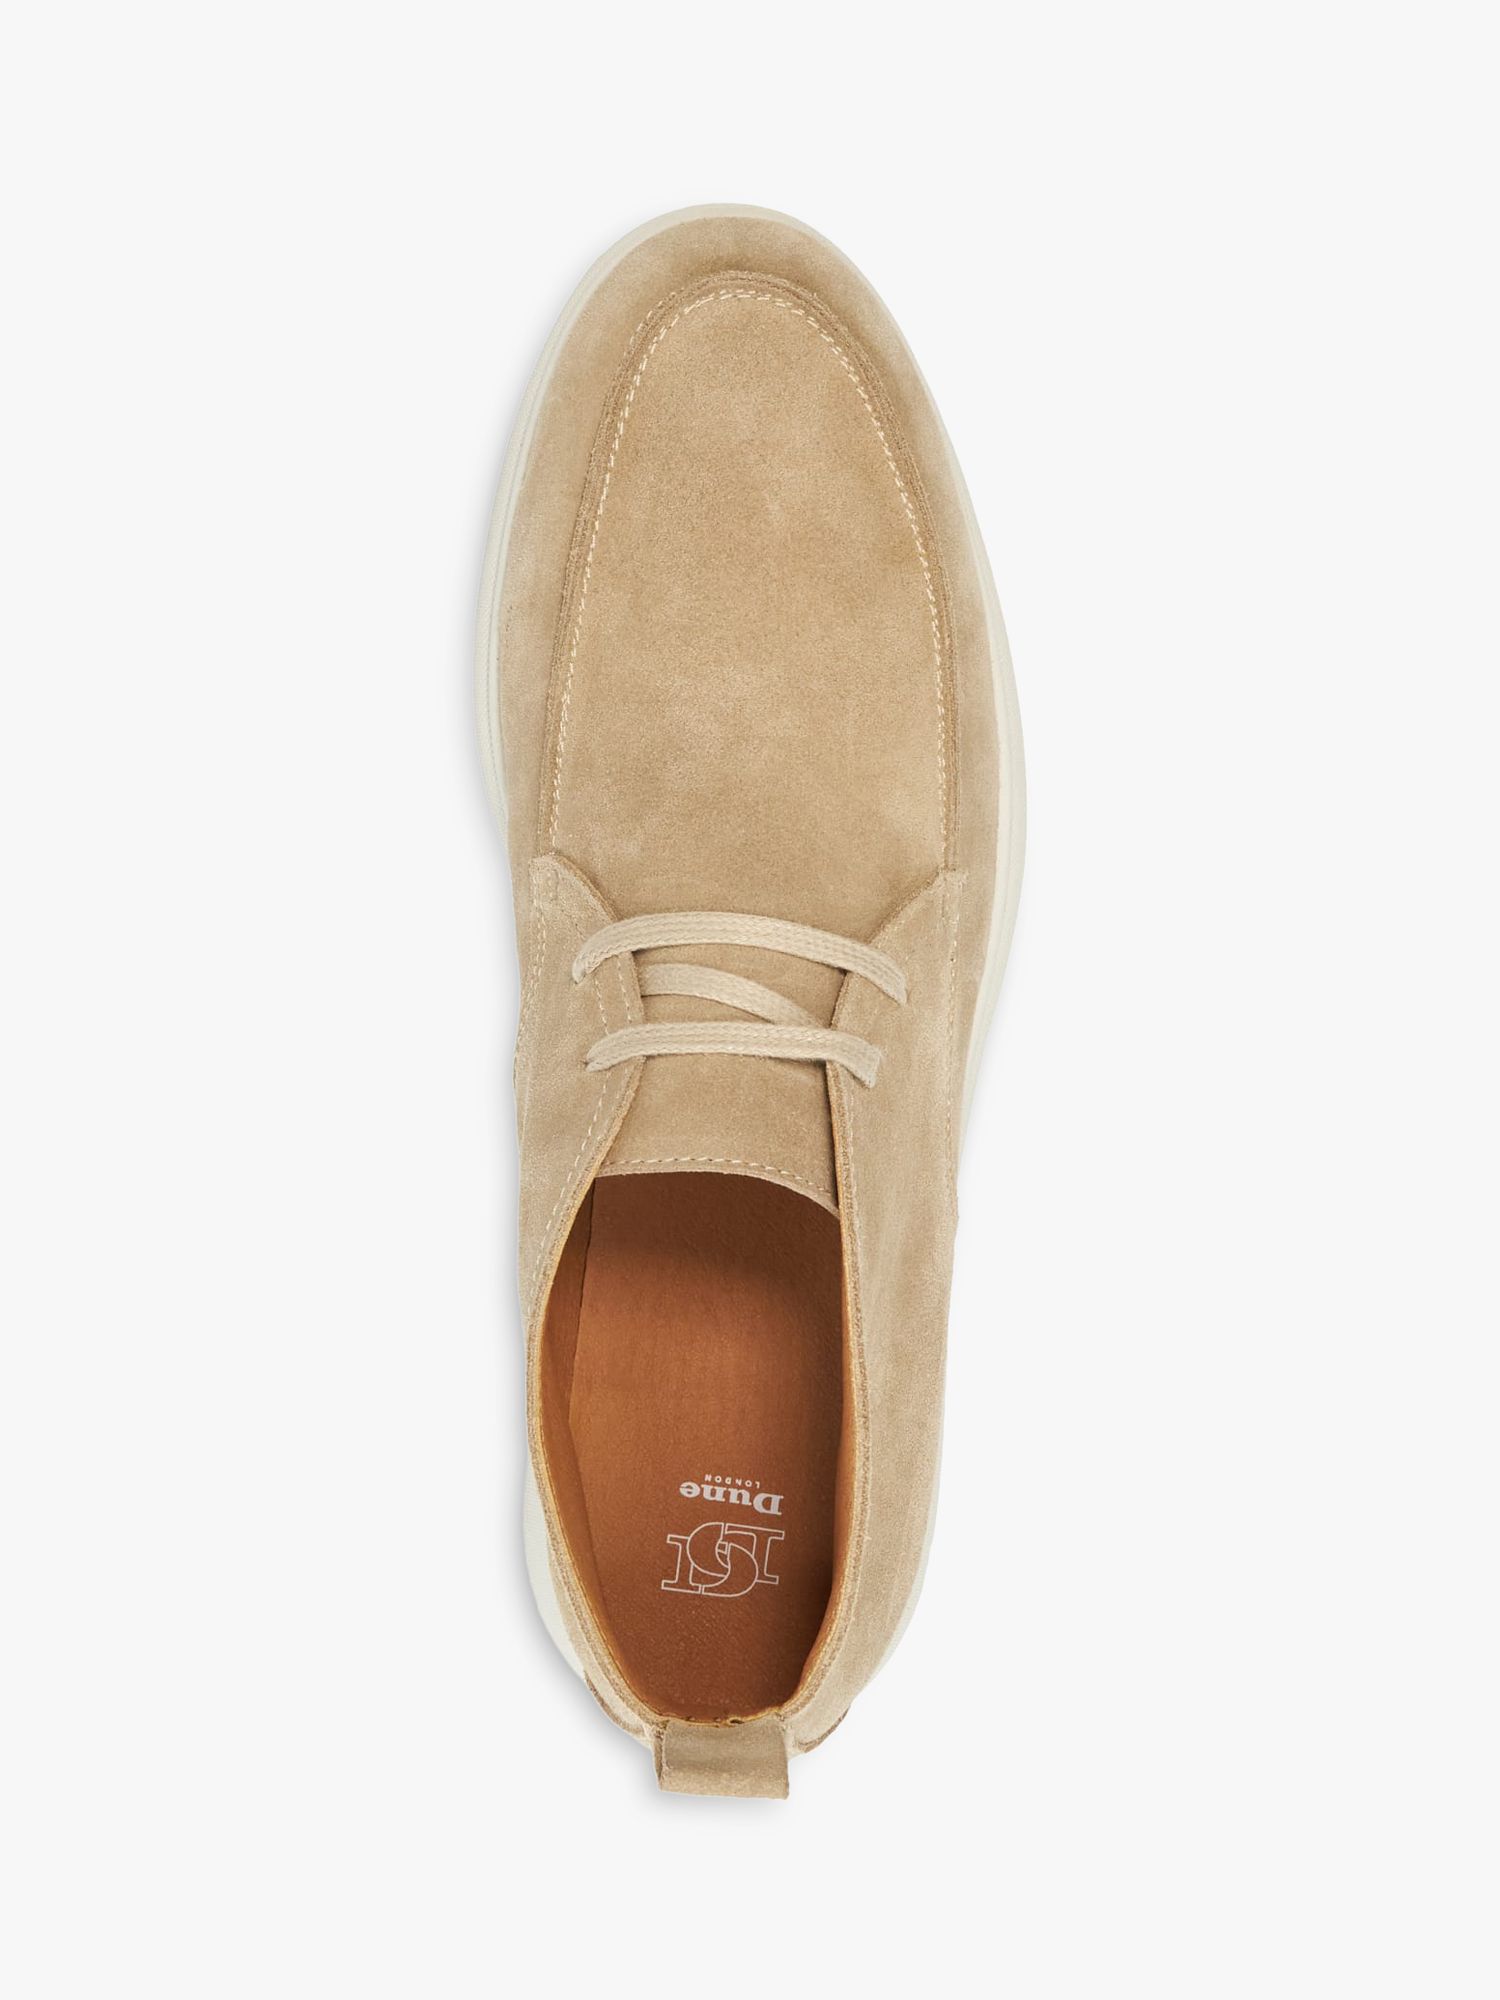 Buy Dune Camly Lace Up Chukka Boots Online at johnlewis.com